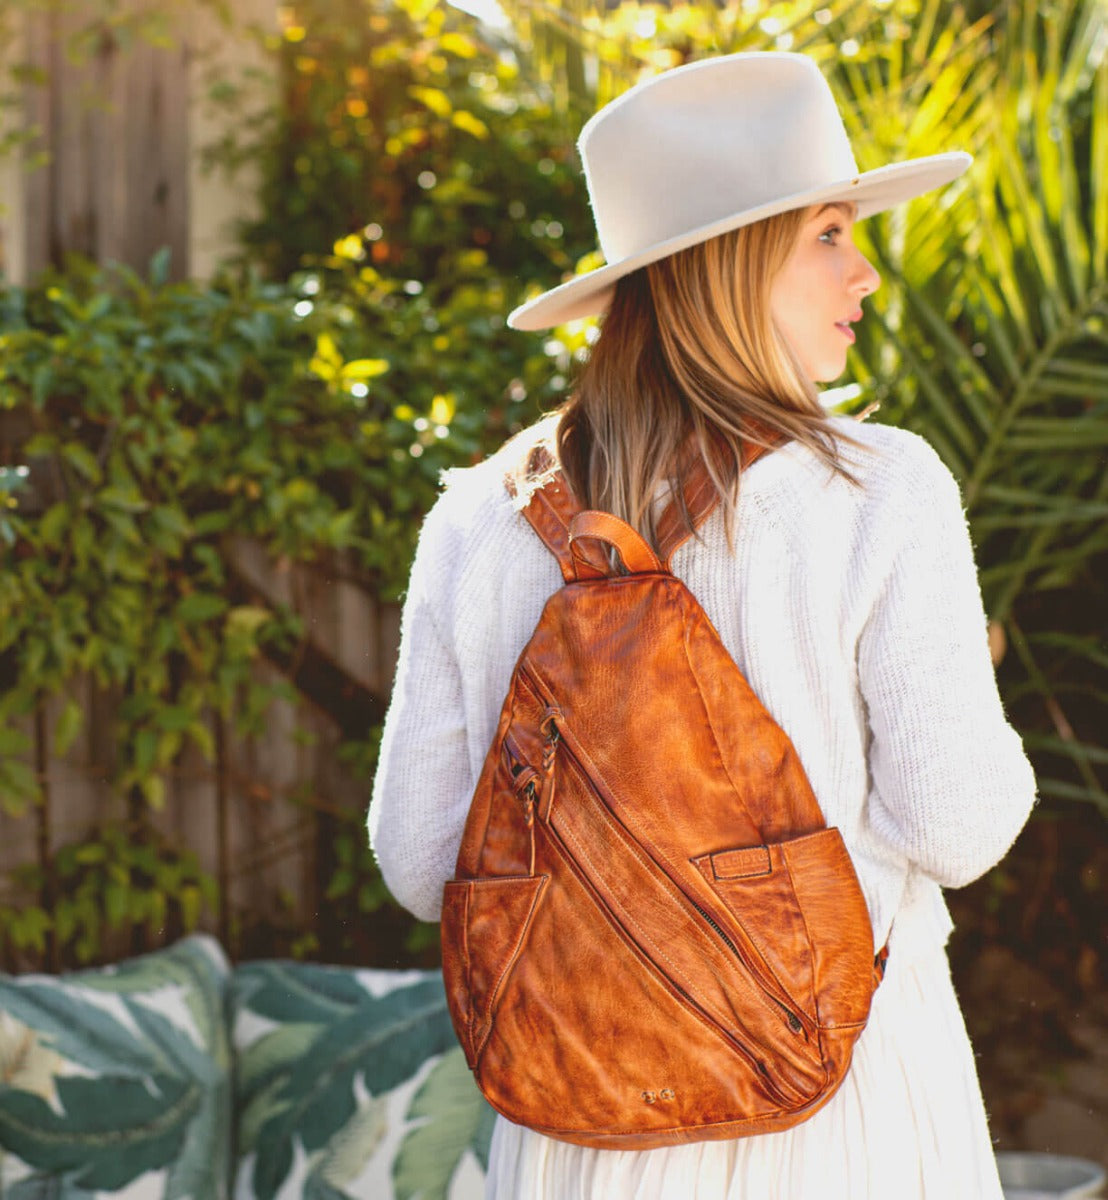 A woman wearing a white hat and a brown leather Tommie backpack by Bed Stu.